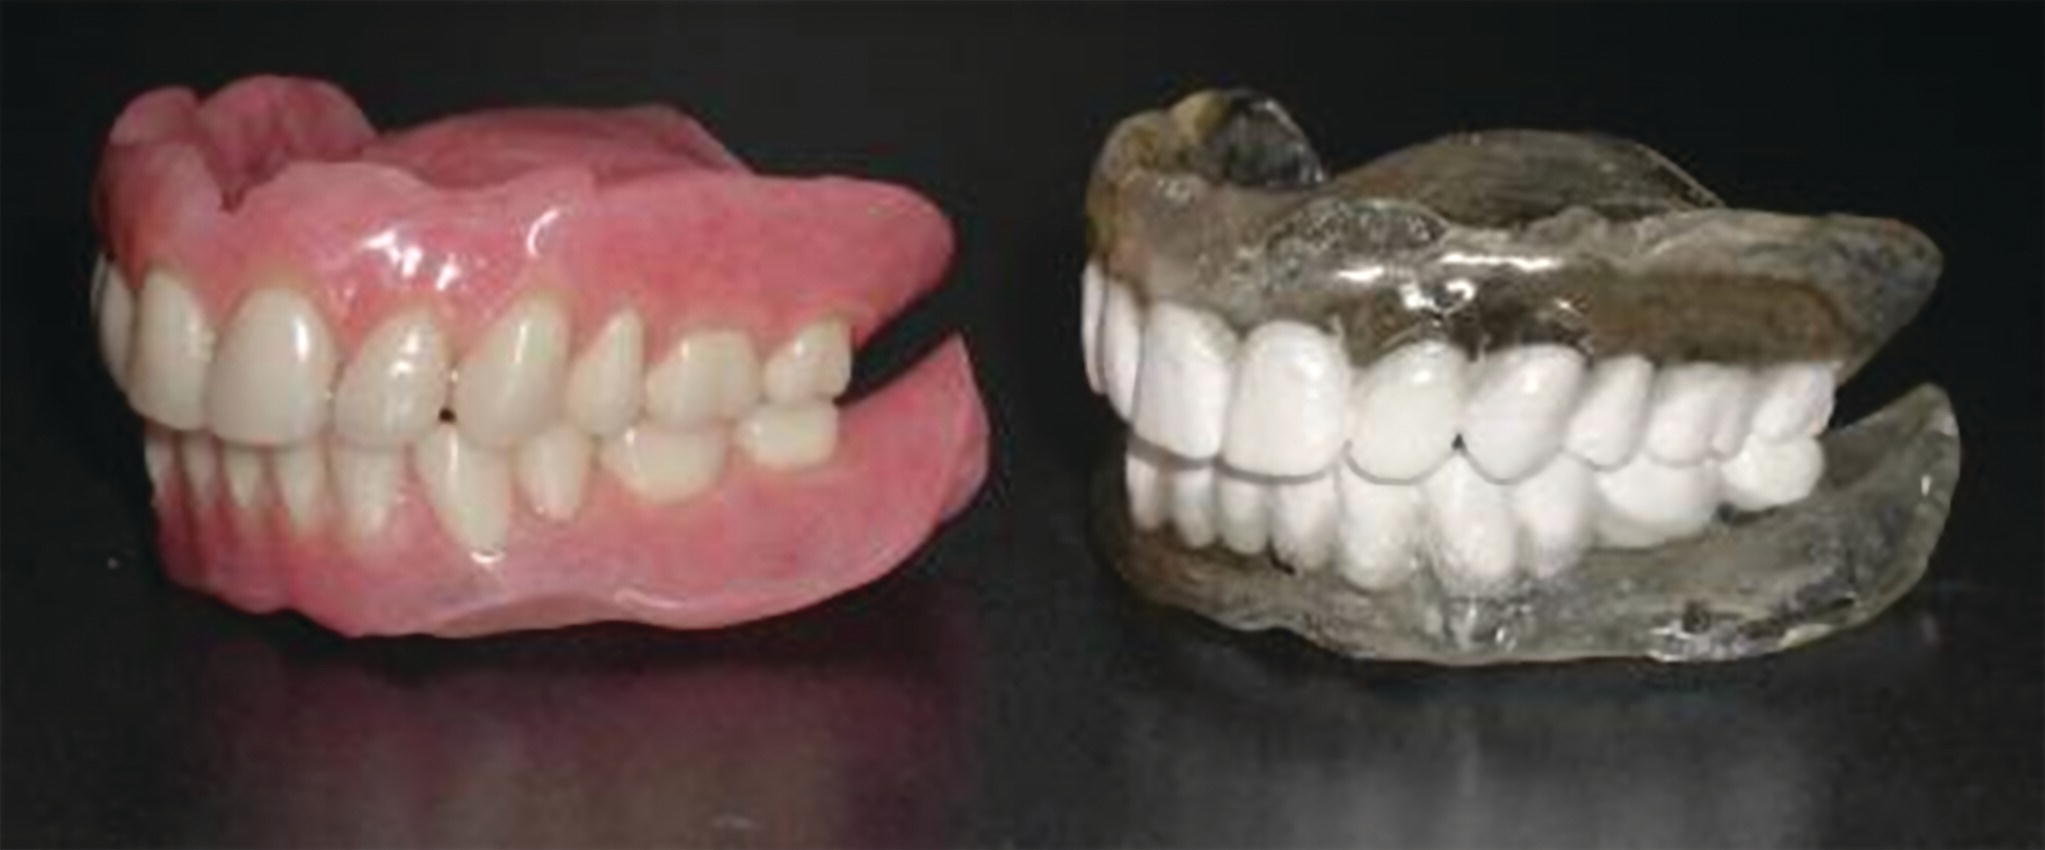 Photo of two teeth prostheses displaying screw‐retained (left) vs. cement‐retained (right) restorations.